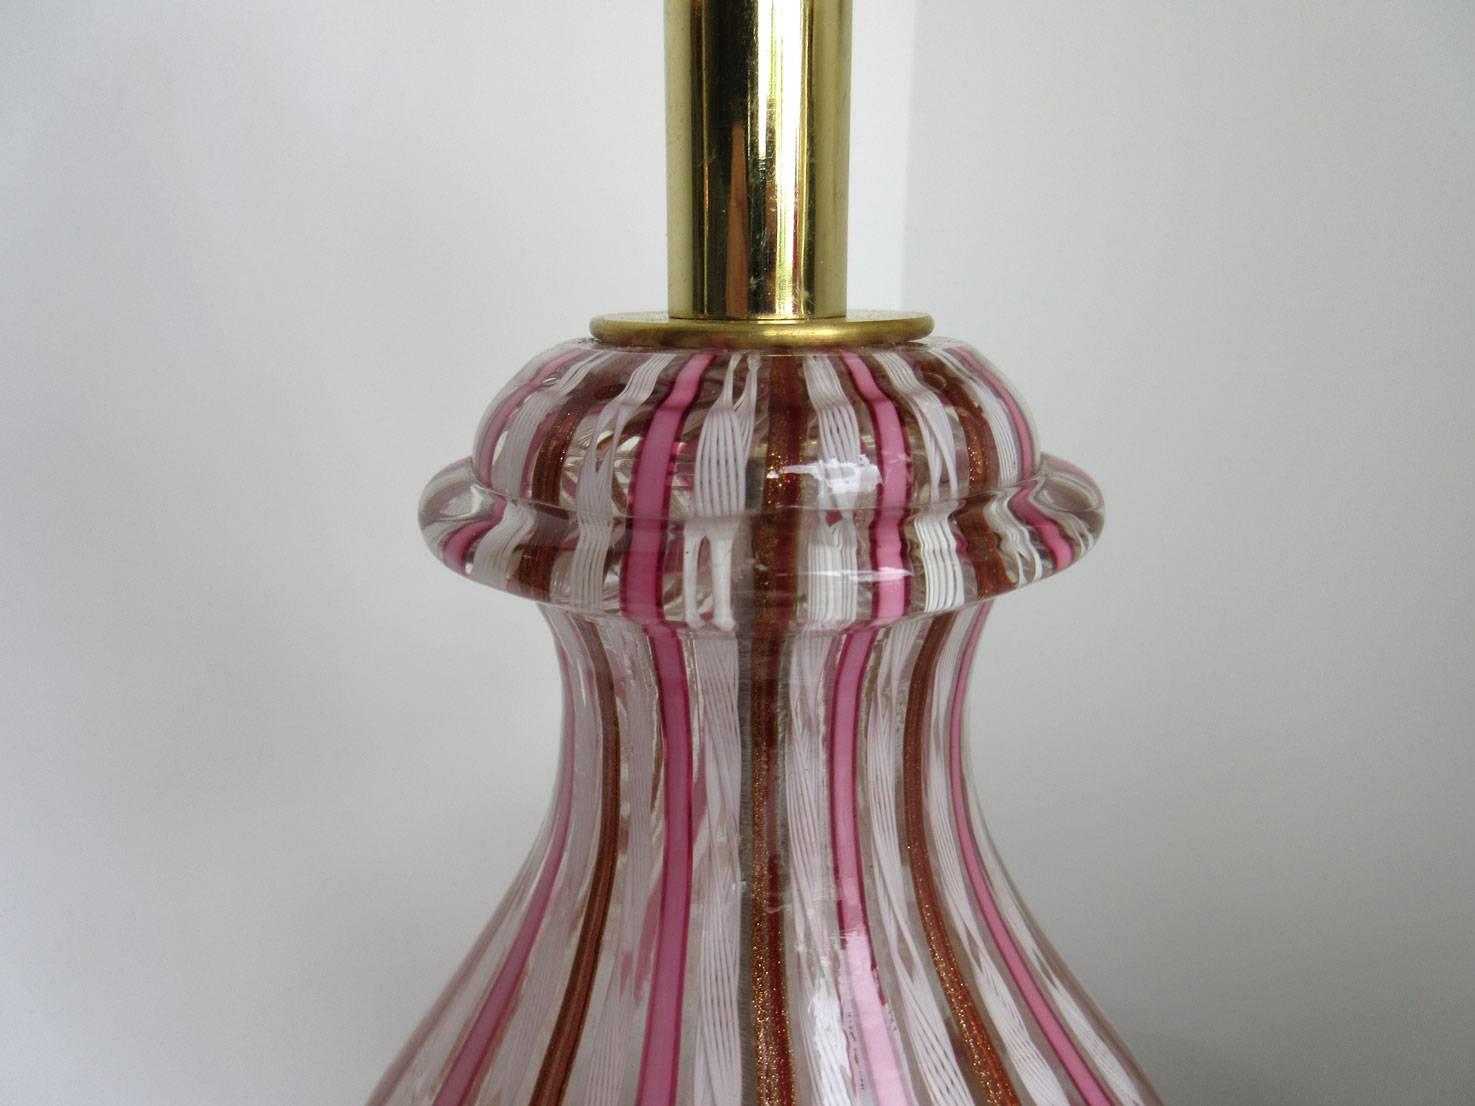 Murano latticino lamp in pink, cherry and white on a Lucite base.